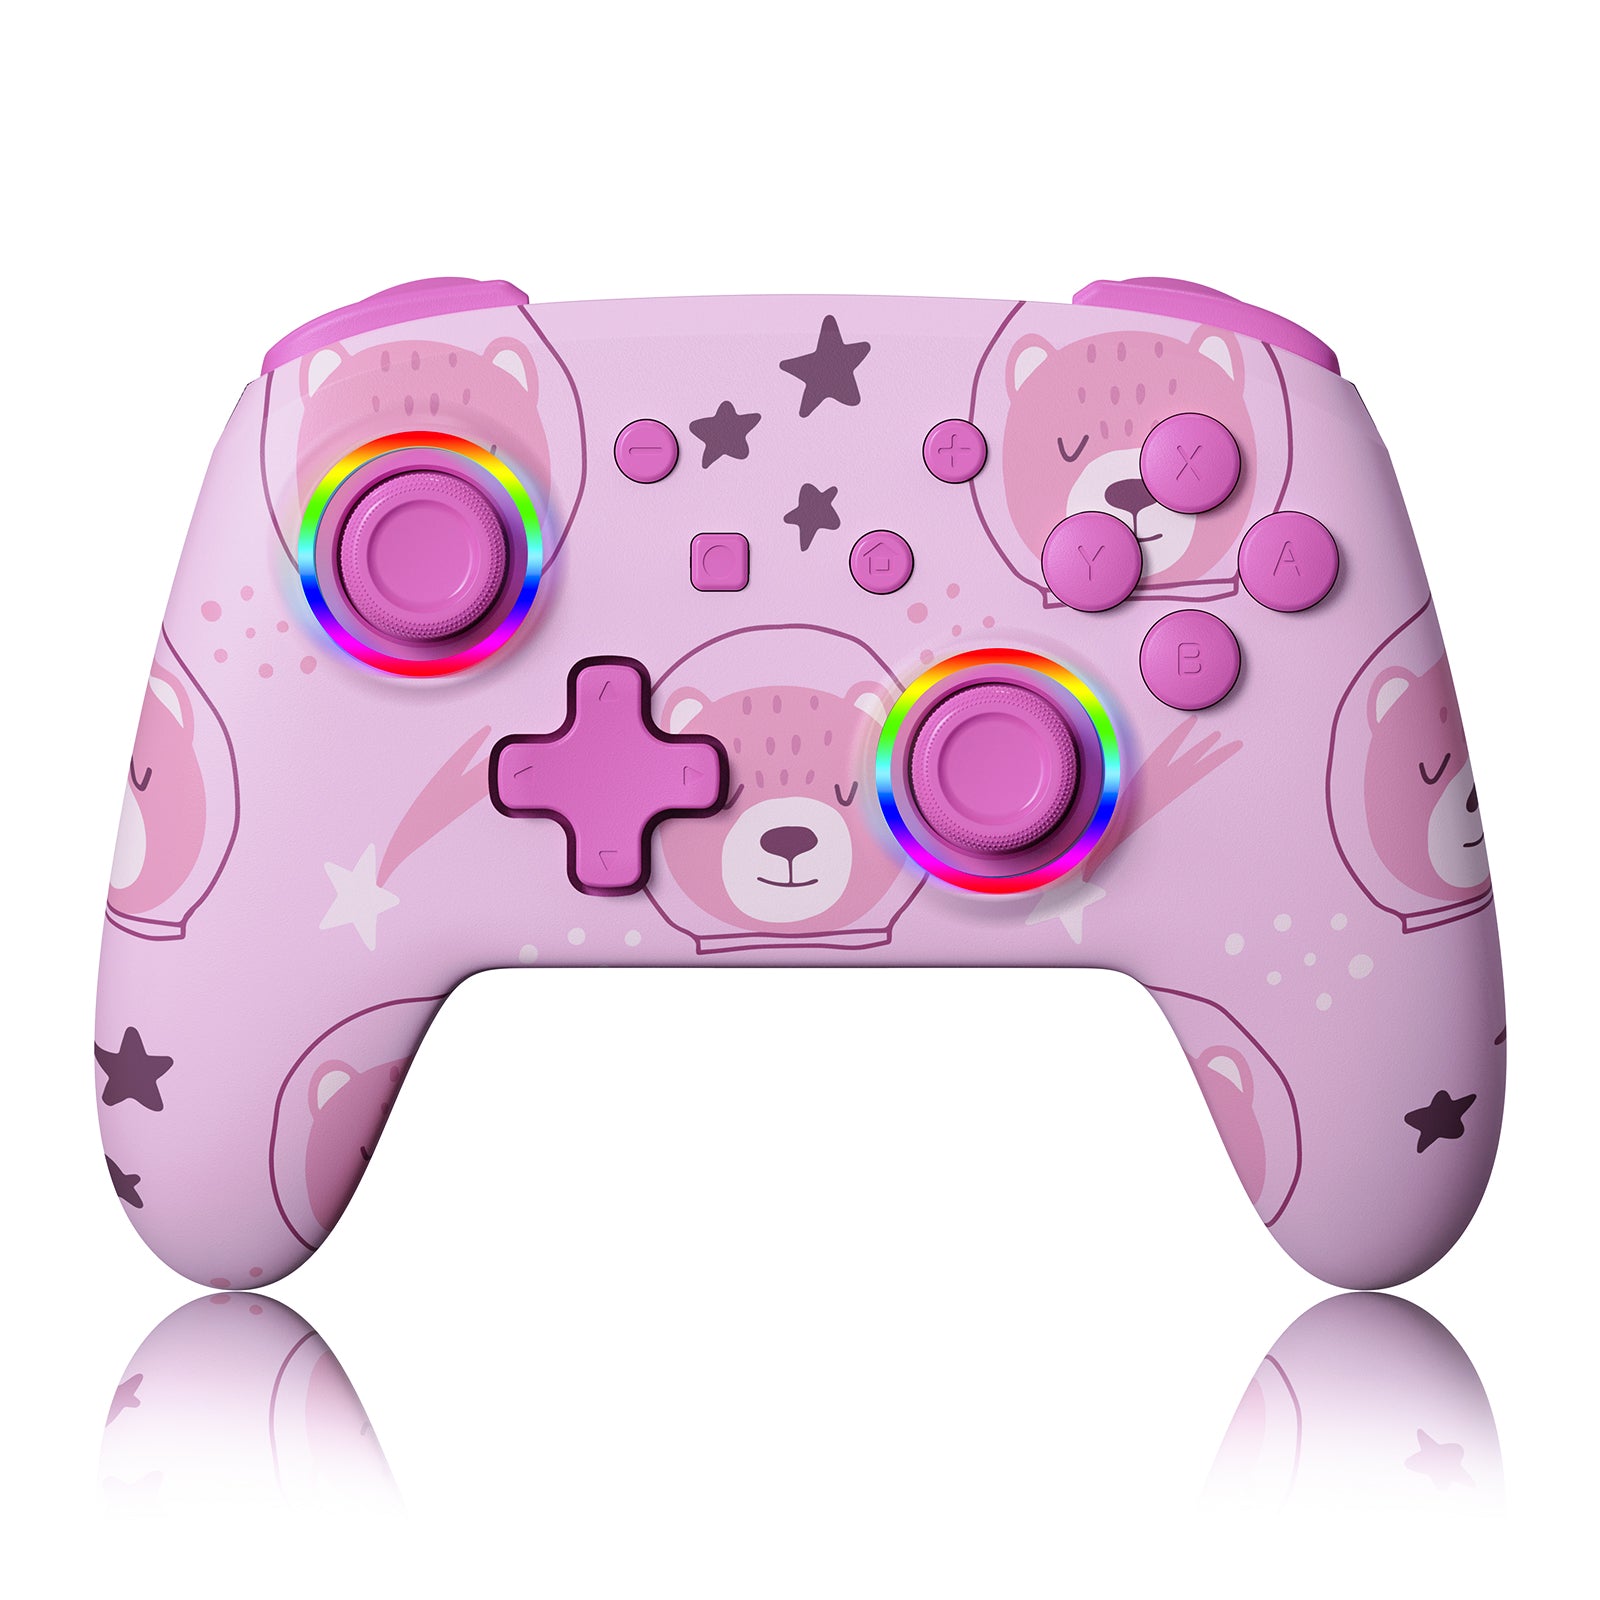 Shows off the pink bear's skin on the Bluetooth controller